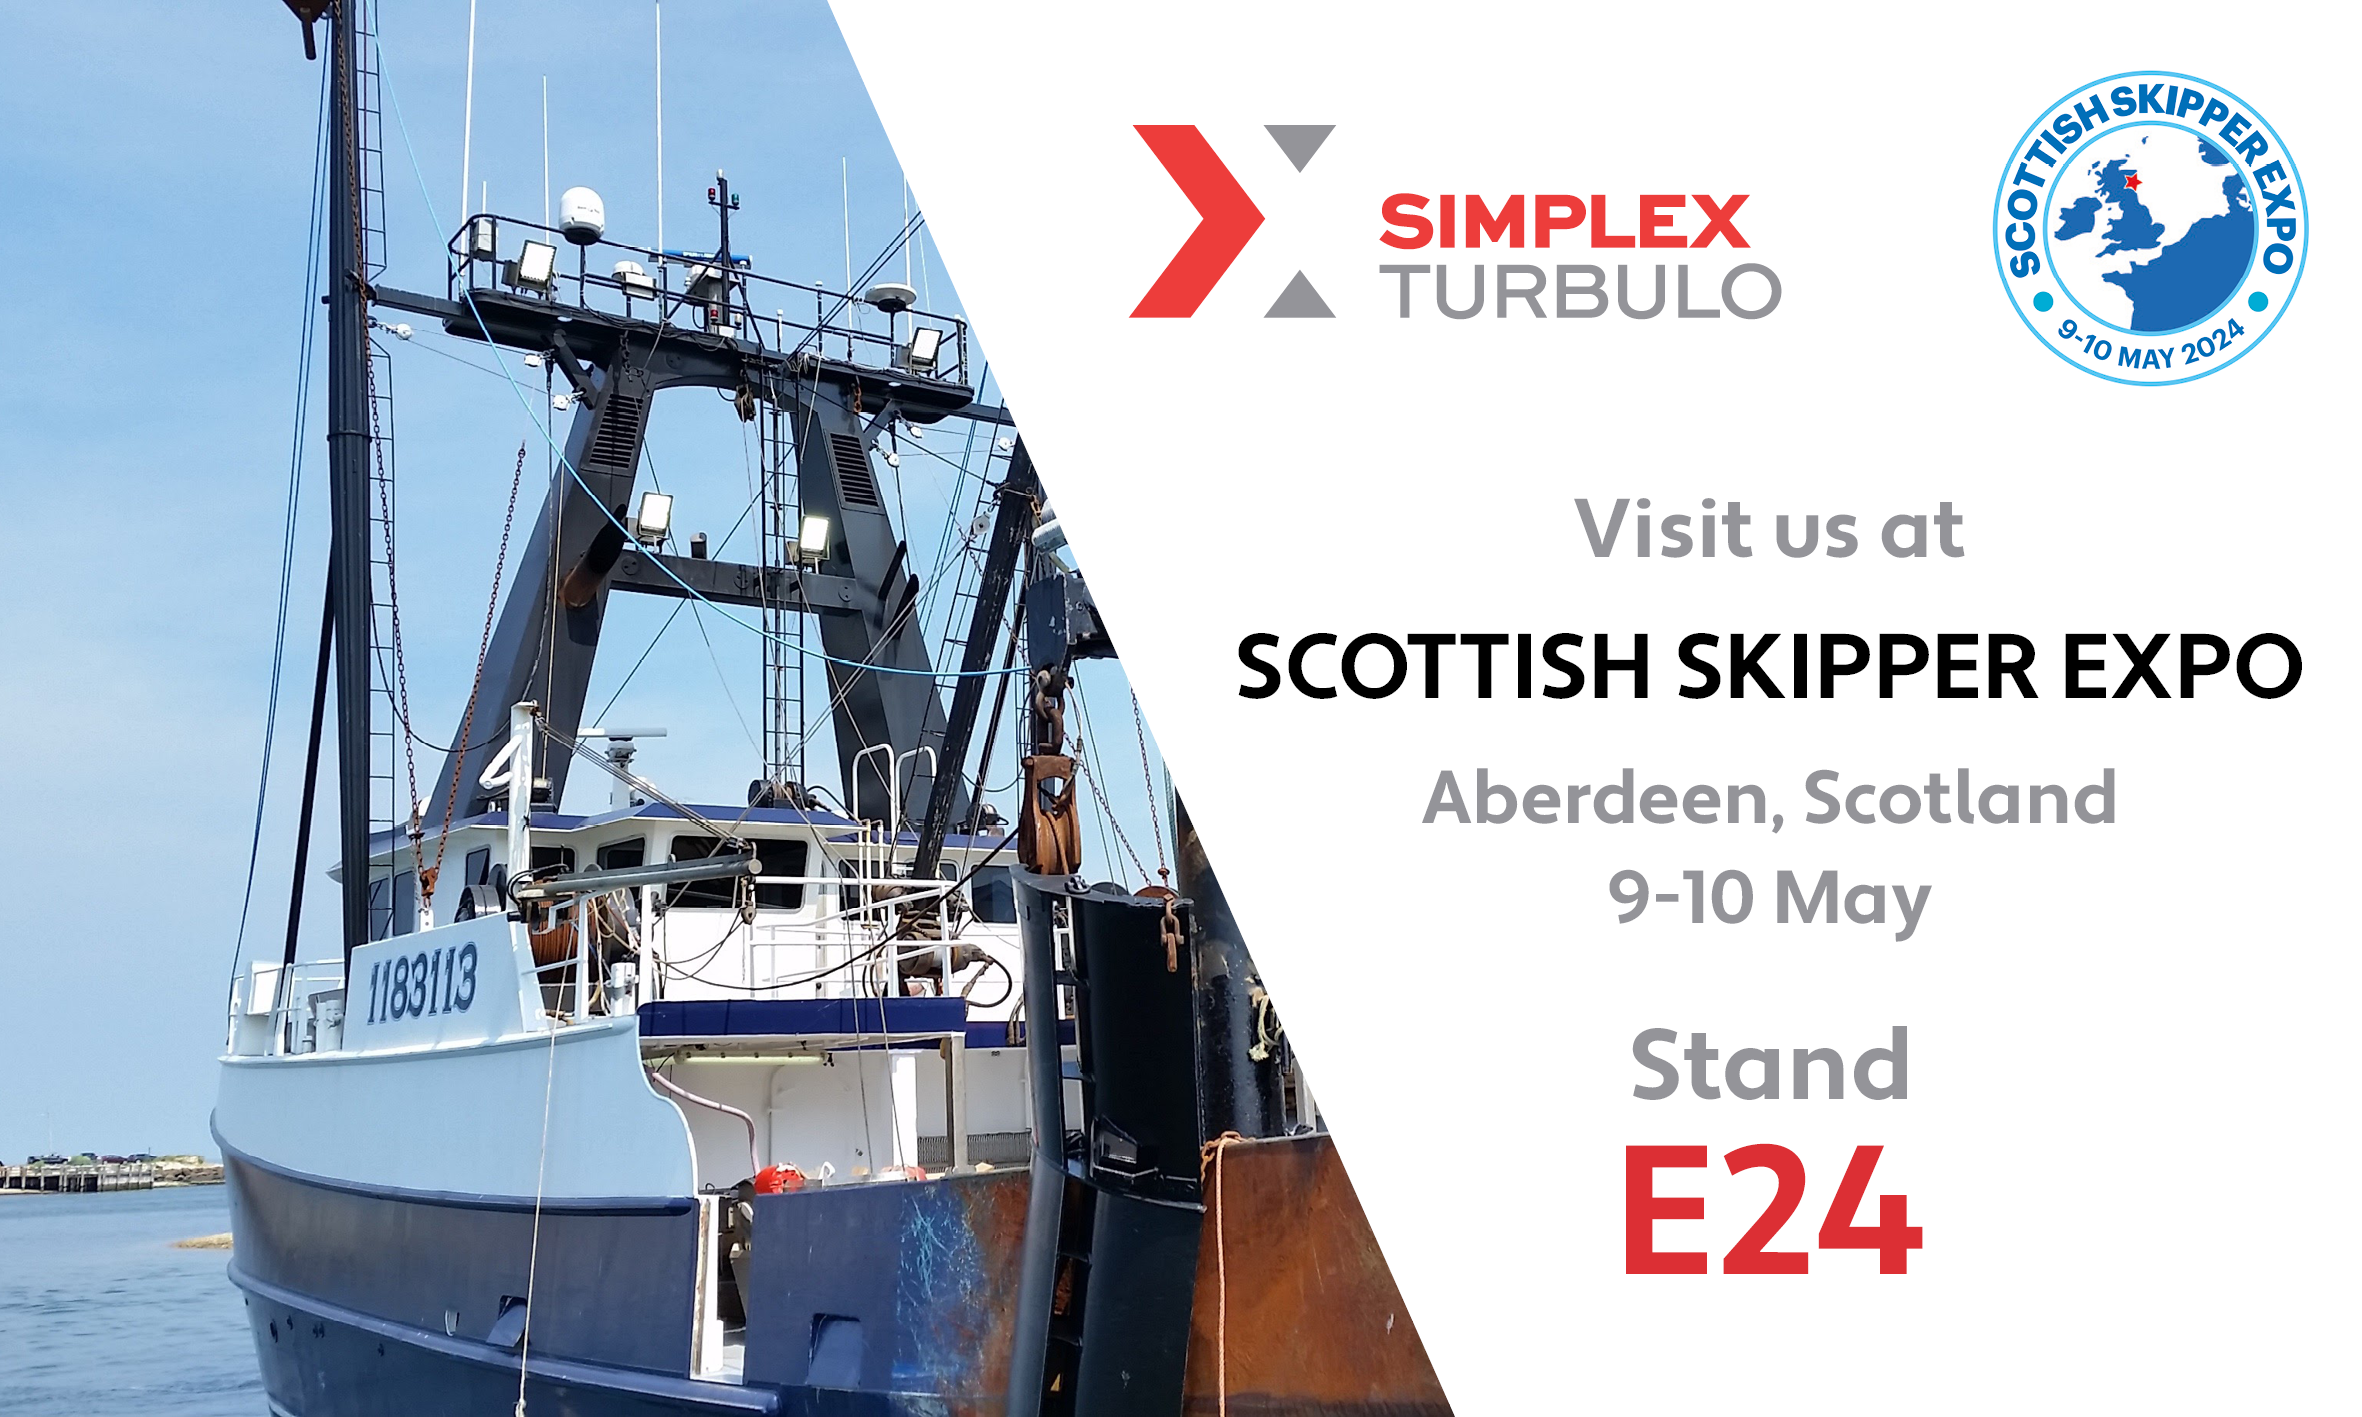 Back to Scotland for Skipper Expo in Aberdeen